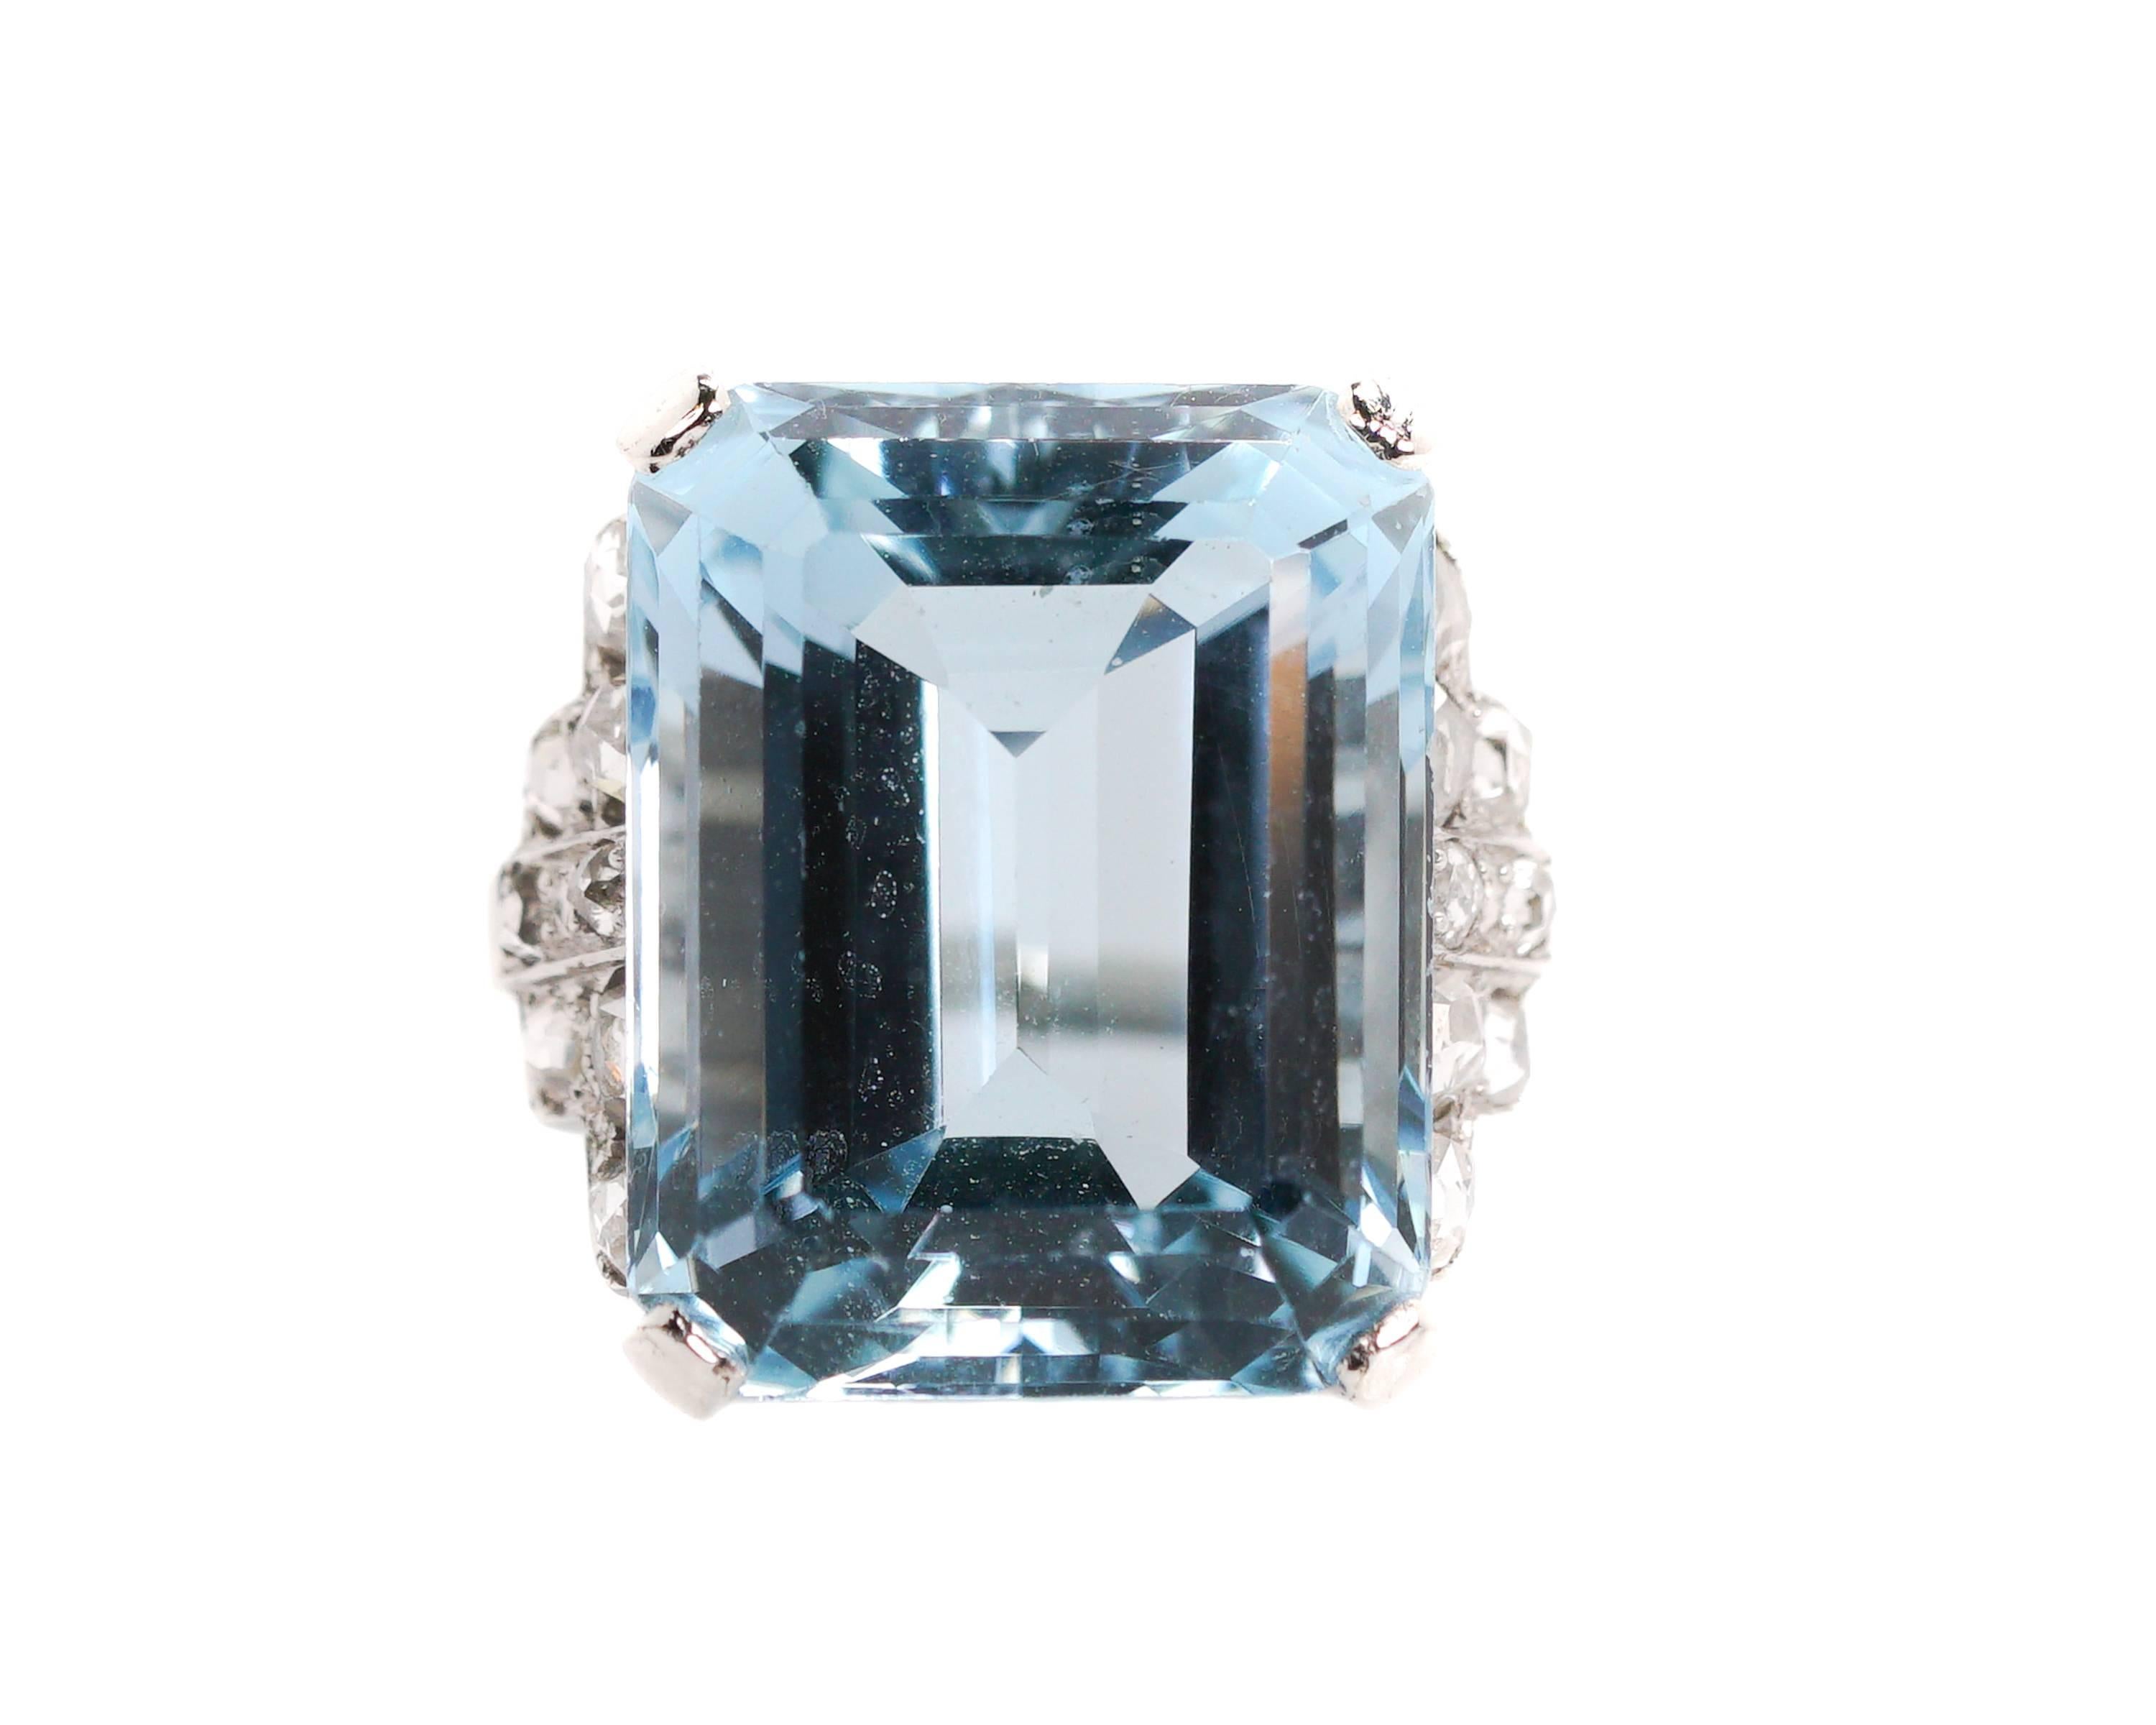 13.75 carat Aquamarine Ring - 18 Karat White Gold, Aquamarine, Diamonds

Features:
13.75 carat Emerald Step cut Aquamarine
16 Rose cut Diamonds
18 Karat White Gold Setting
All gemstones are prong set
Cathedral Setting with Open Gallery

Fits a size